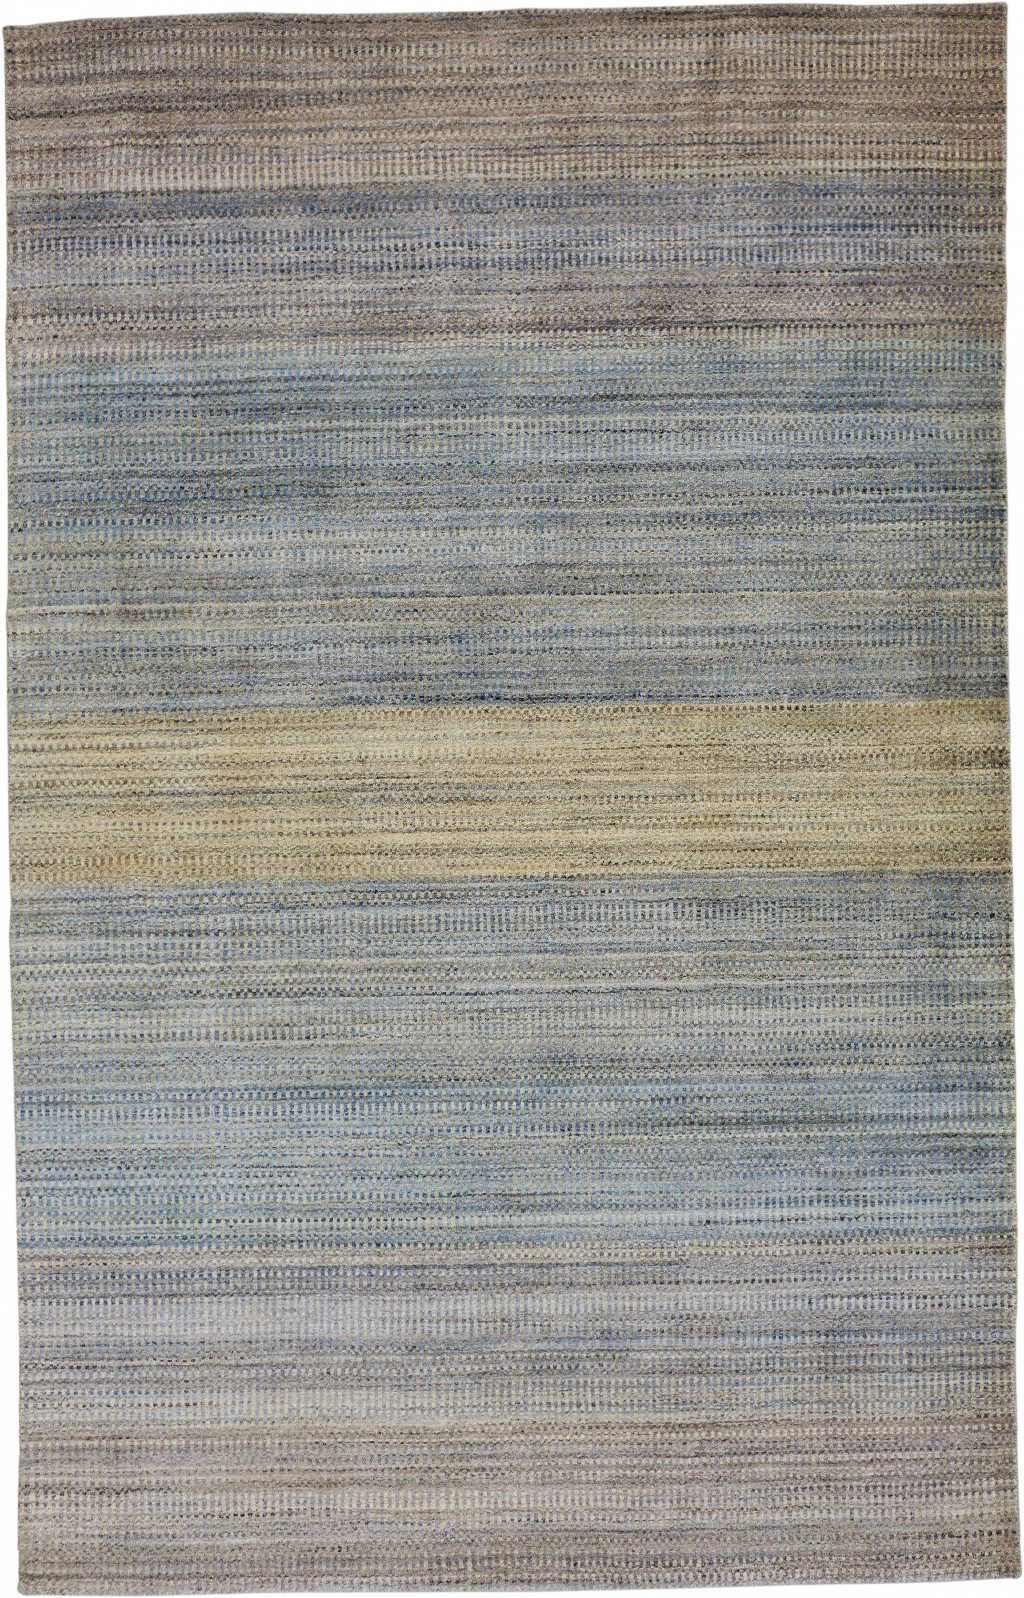 8' X 11' Blue Purple And Tan Ombre Hand Woven Area Rug-511745-1